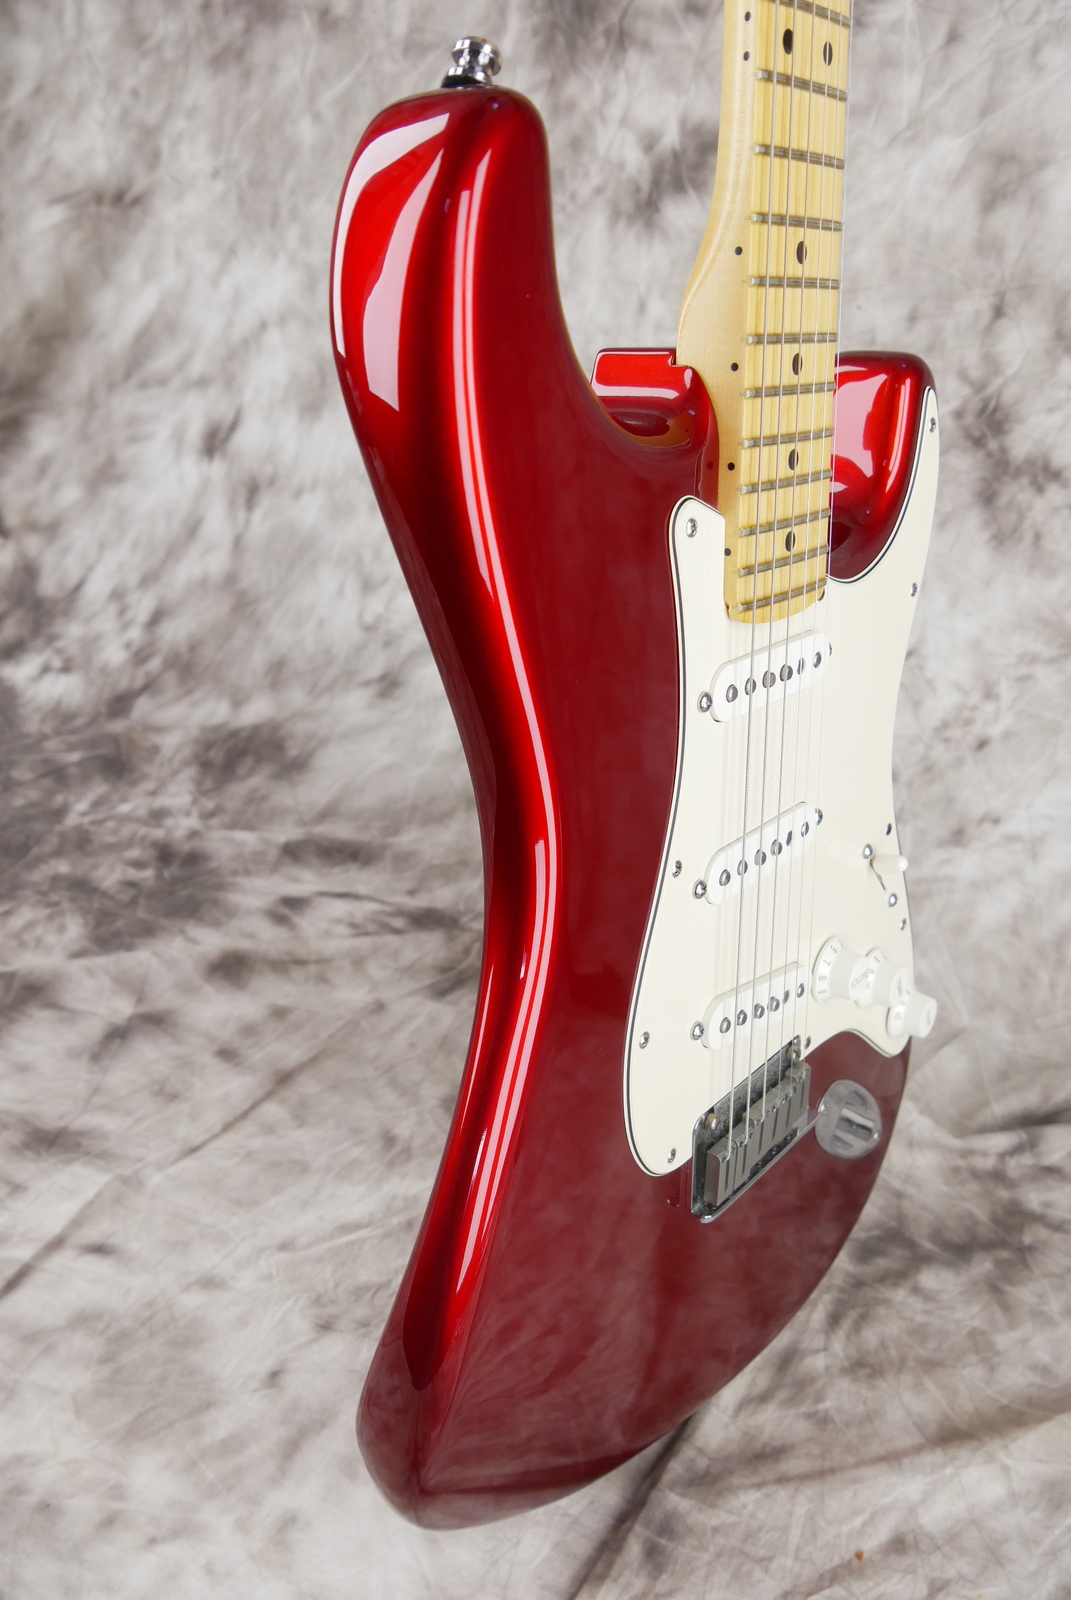 Fender_Stratocaster_USA_built_from_parts_candy_apple_red_2015-005.JPG